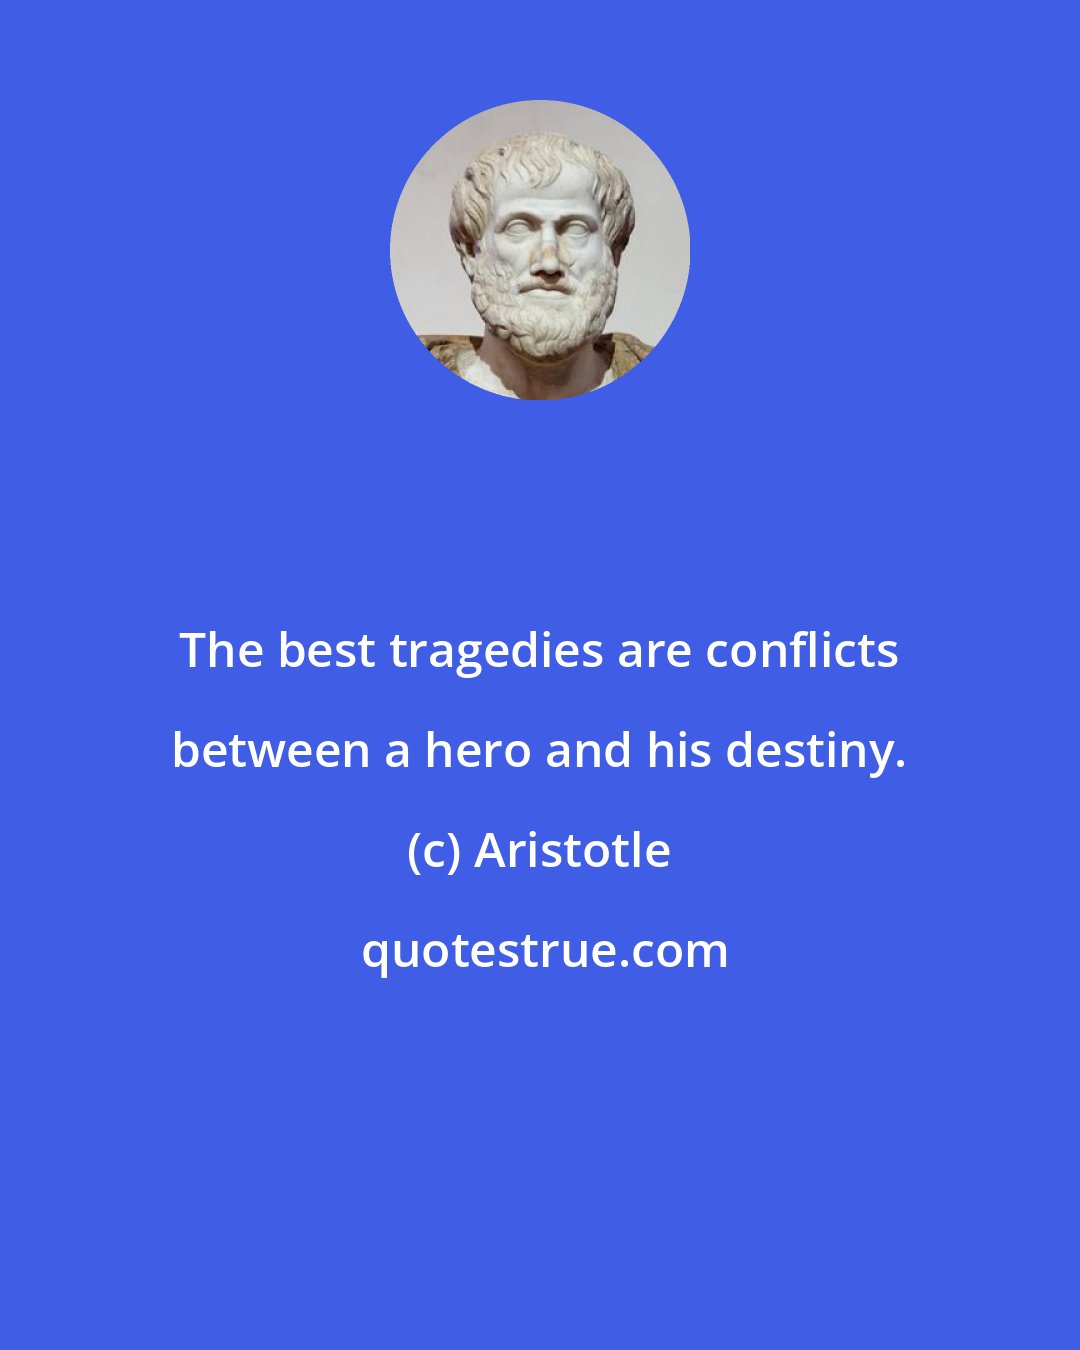 Aristotle: The best tragedies are conflicts between a hero and his destiny.